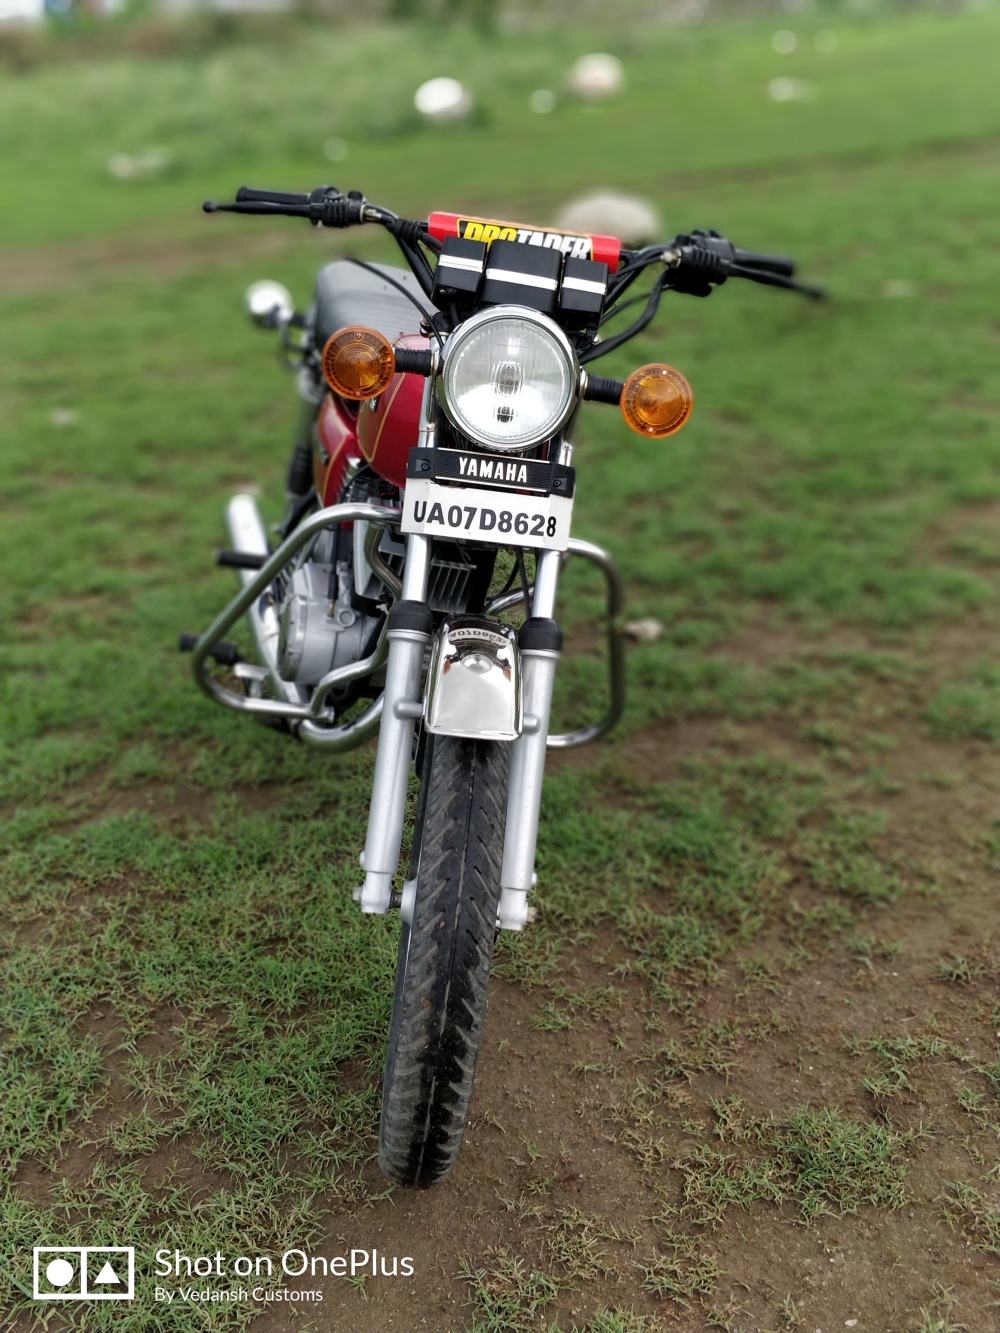 Meet Fully Restored Yamaha RX 135 by Vedansh Automobile - close-up